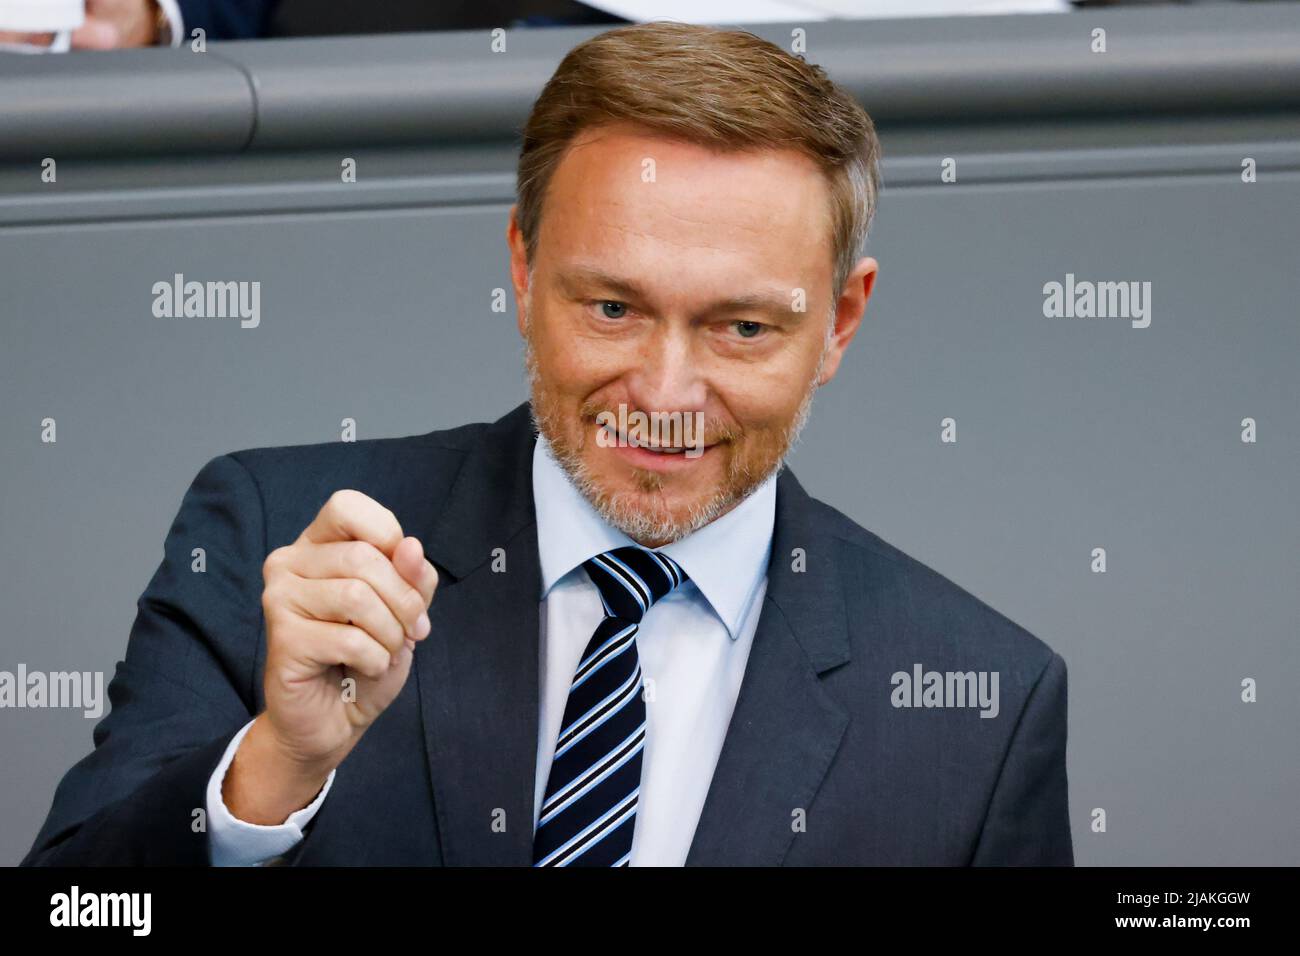 German Finance Minister Christian Lindner speaks during a session of German lower house of parliament, Bundestag, in Berlin, Germany May 31, 2022. REUTERS/Hannibal Hanschke Stock Photo